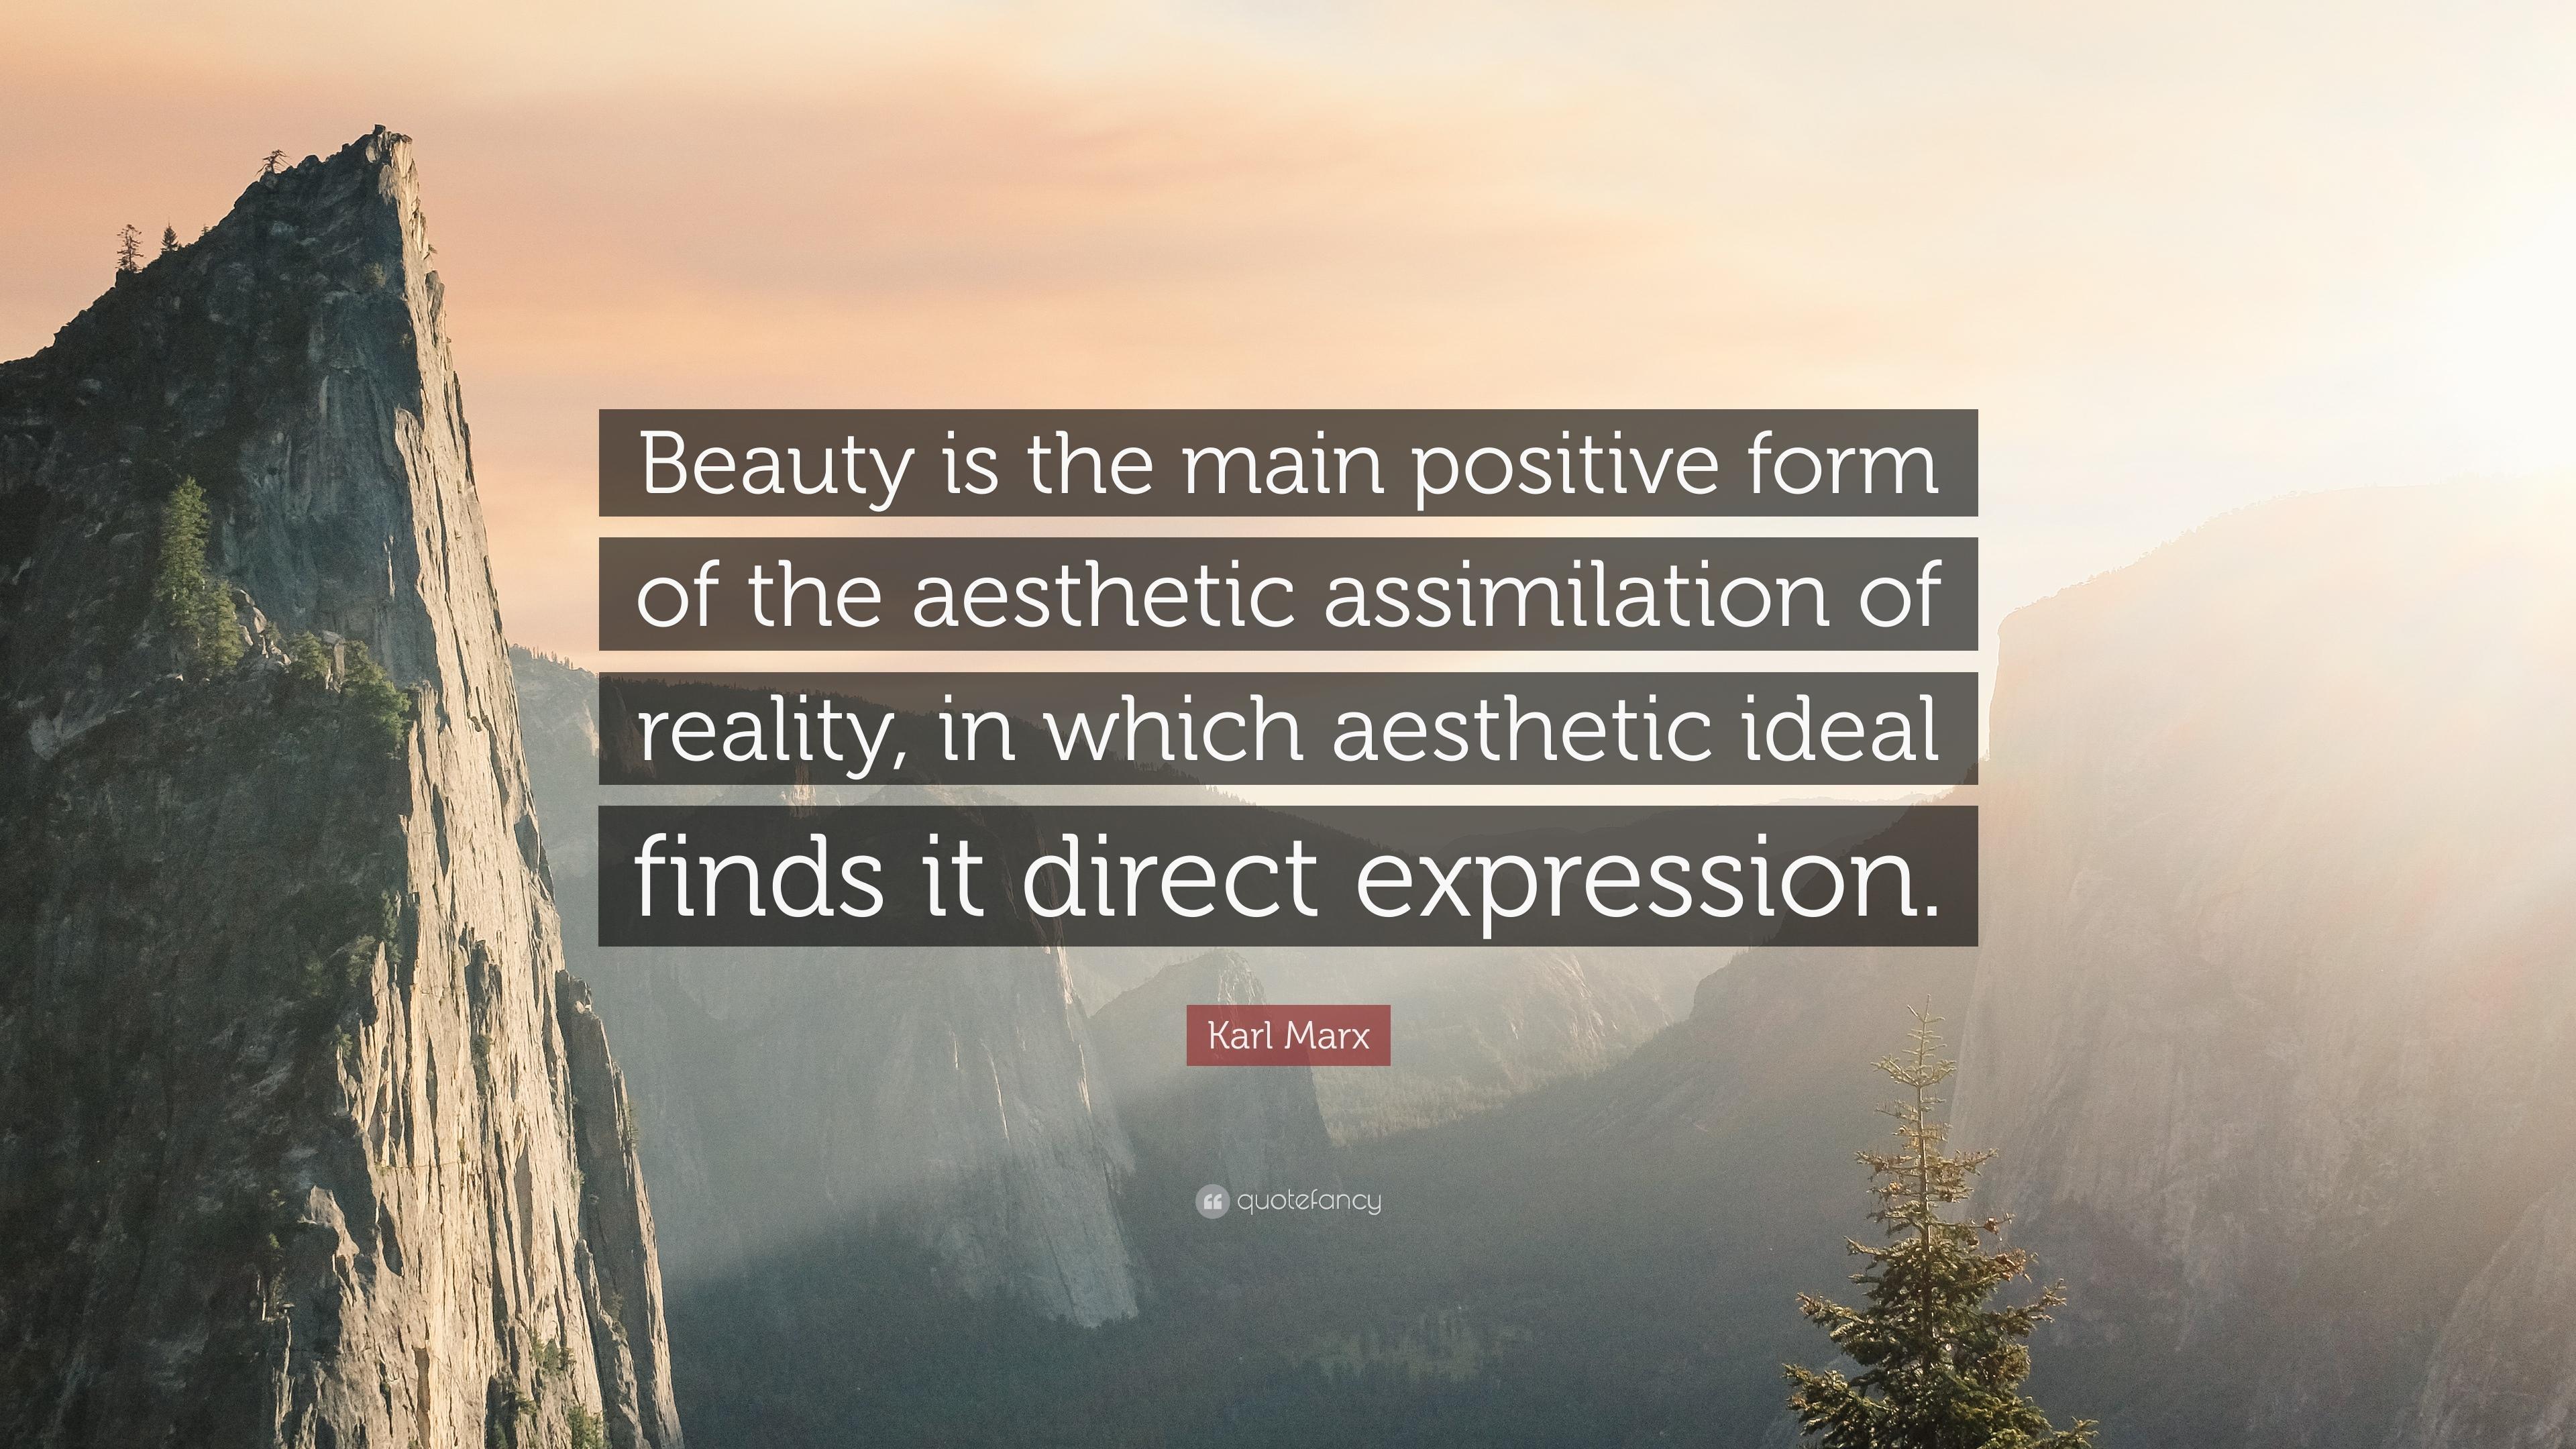 Karl Marx Quote: “Beauty is the main positive form